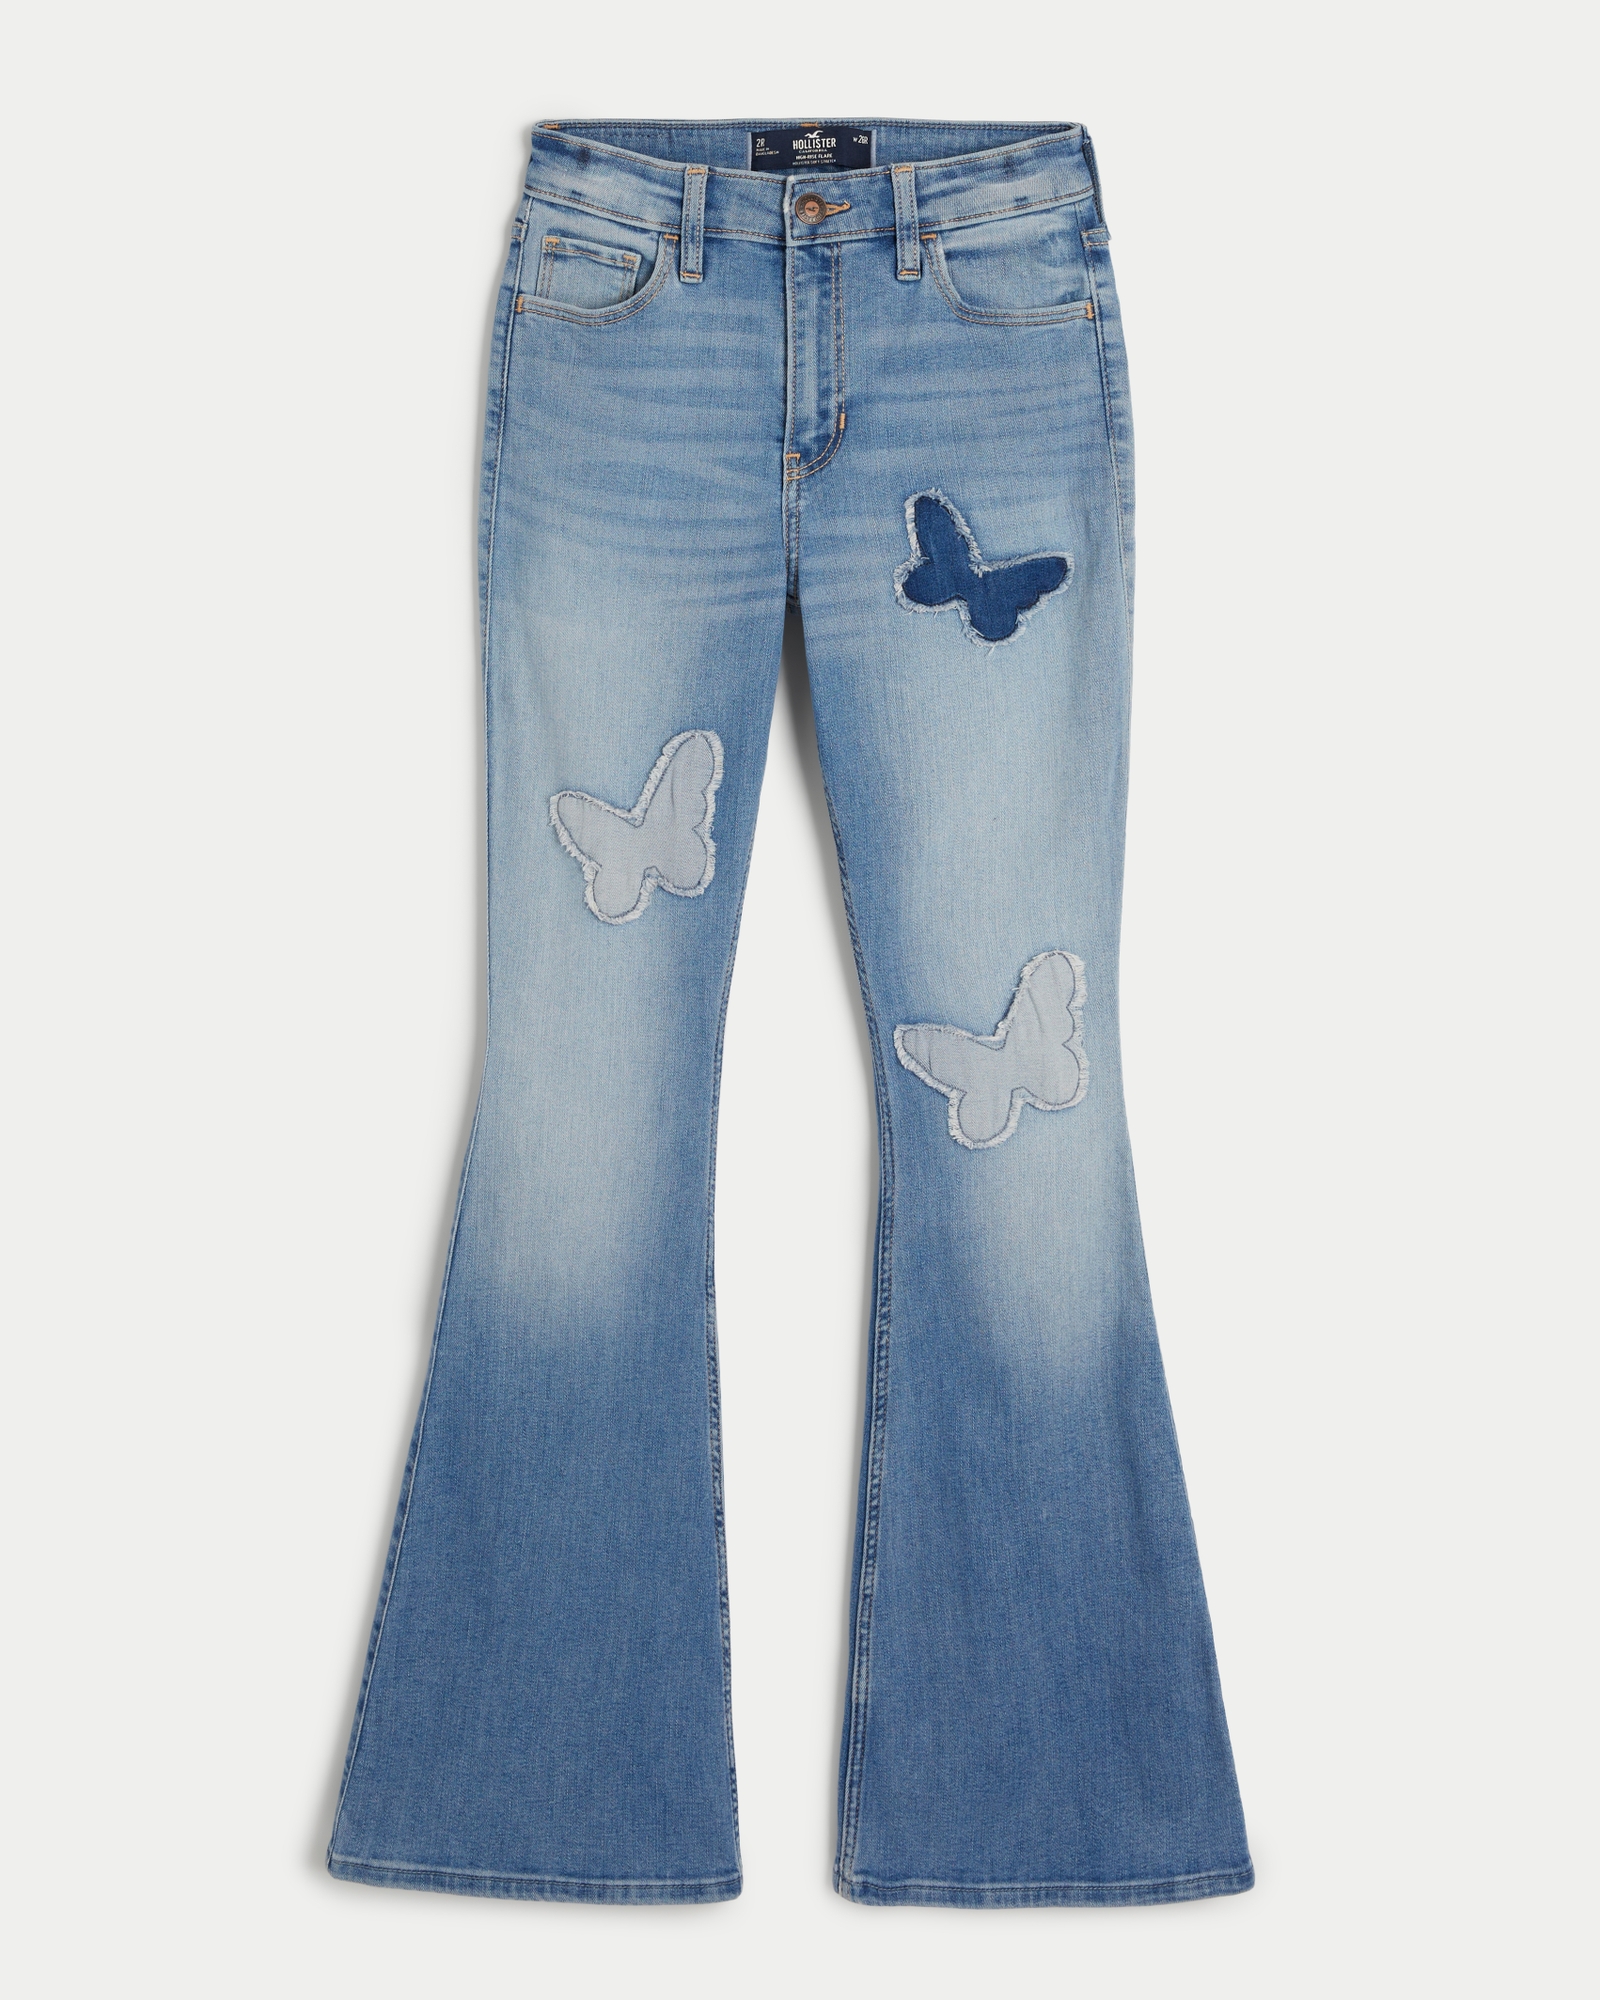 Womens European Denim Back Letters Embroidered Cute Jeans For Women Thin,  Loose Fit, High Waisted, Straight Pants For Spring And Autumn Fashion  210730 From Cong02, $26.93